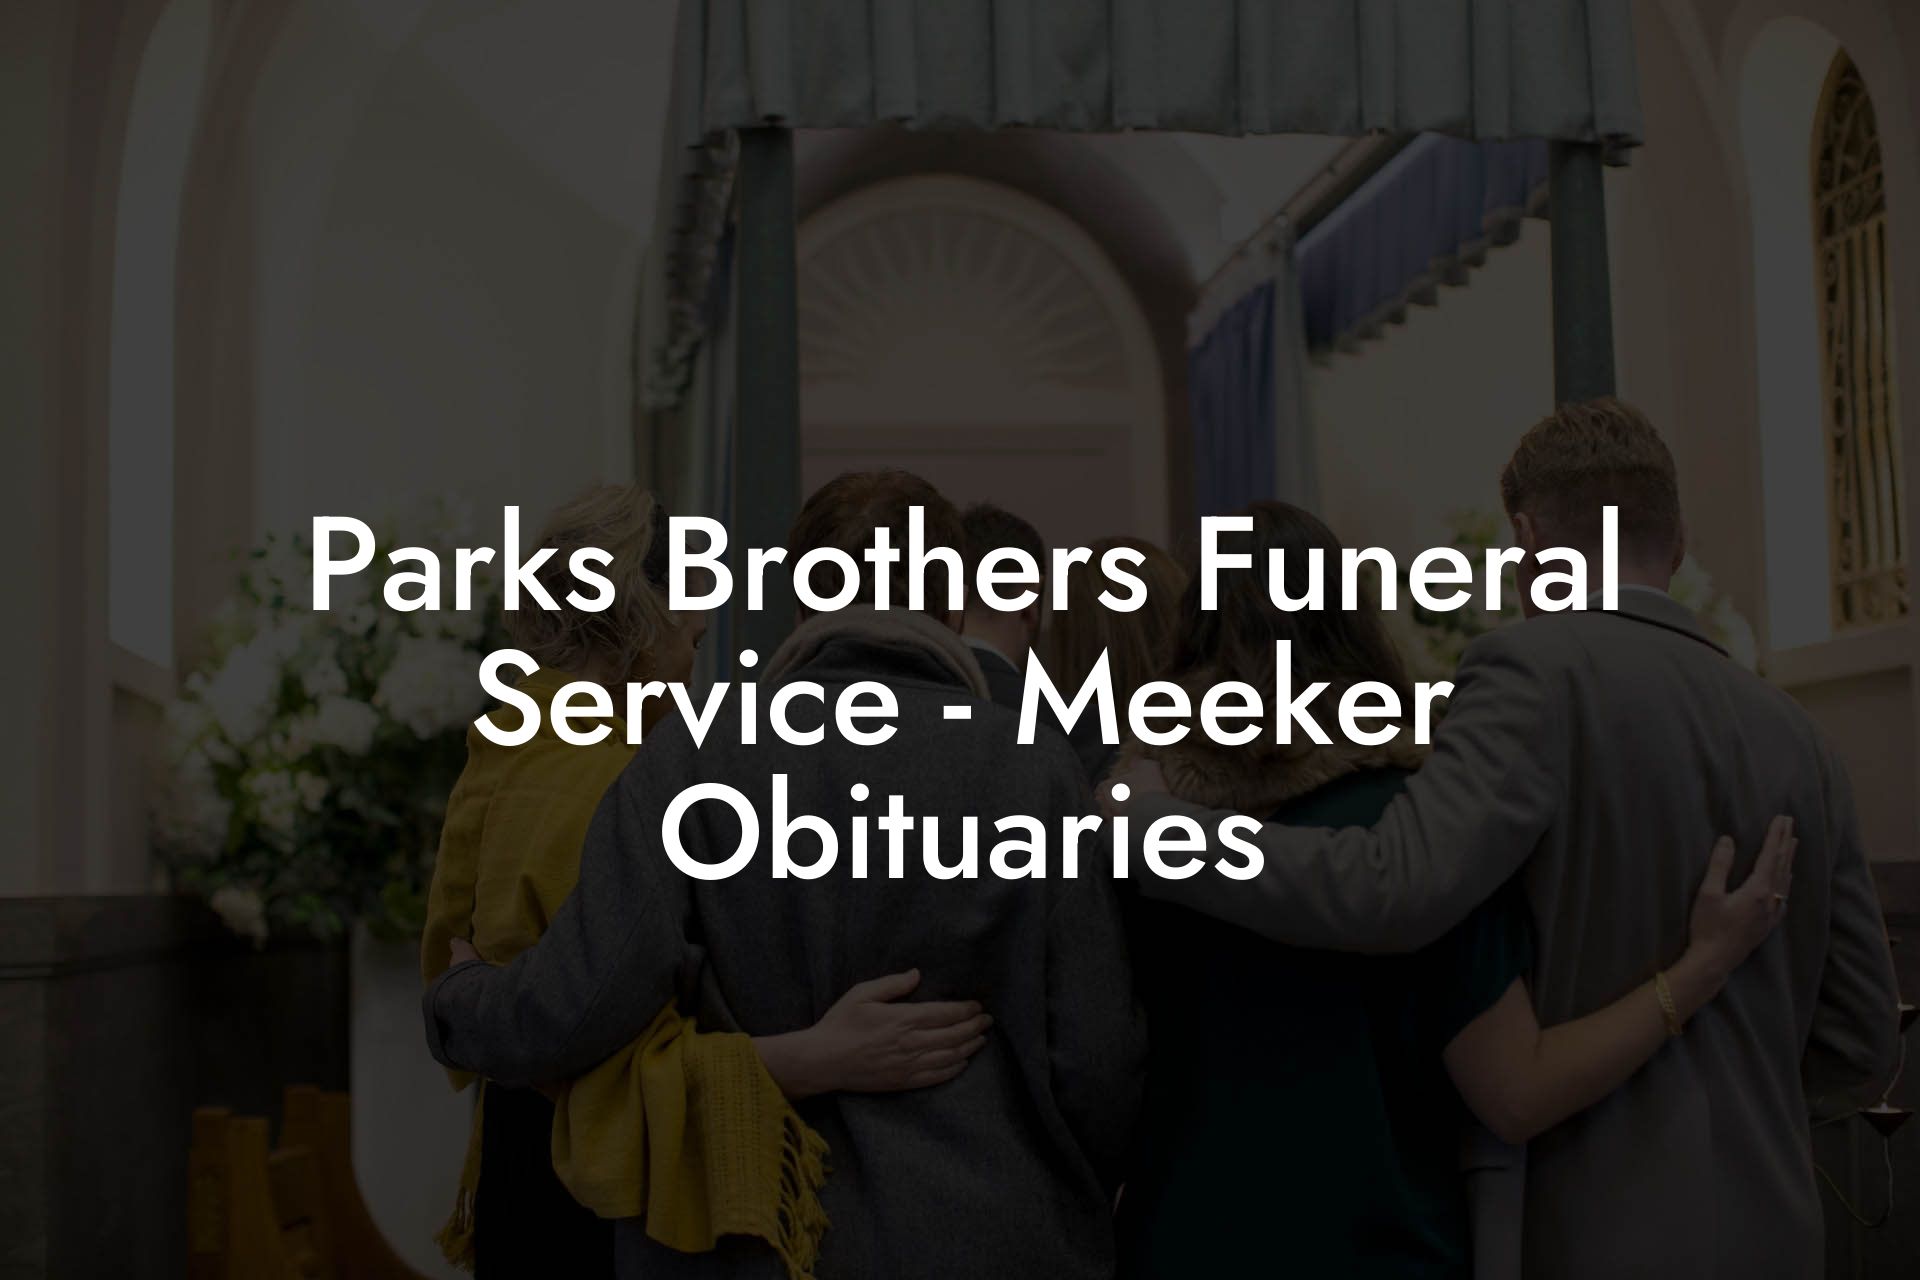 Parks Brothers Funeral Service - Meeker Obituaries